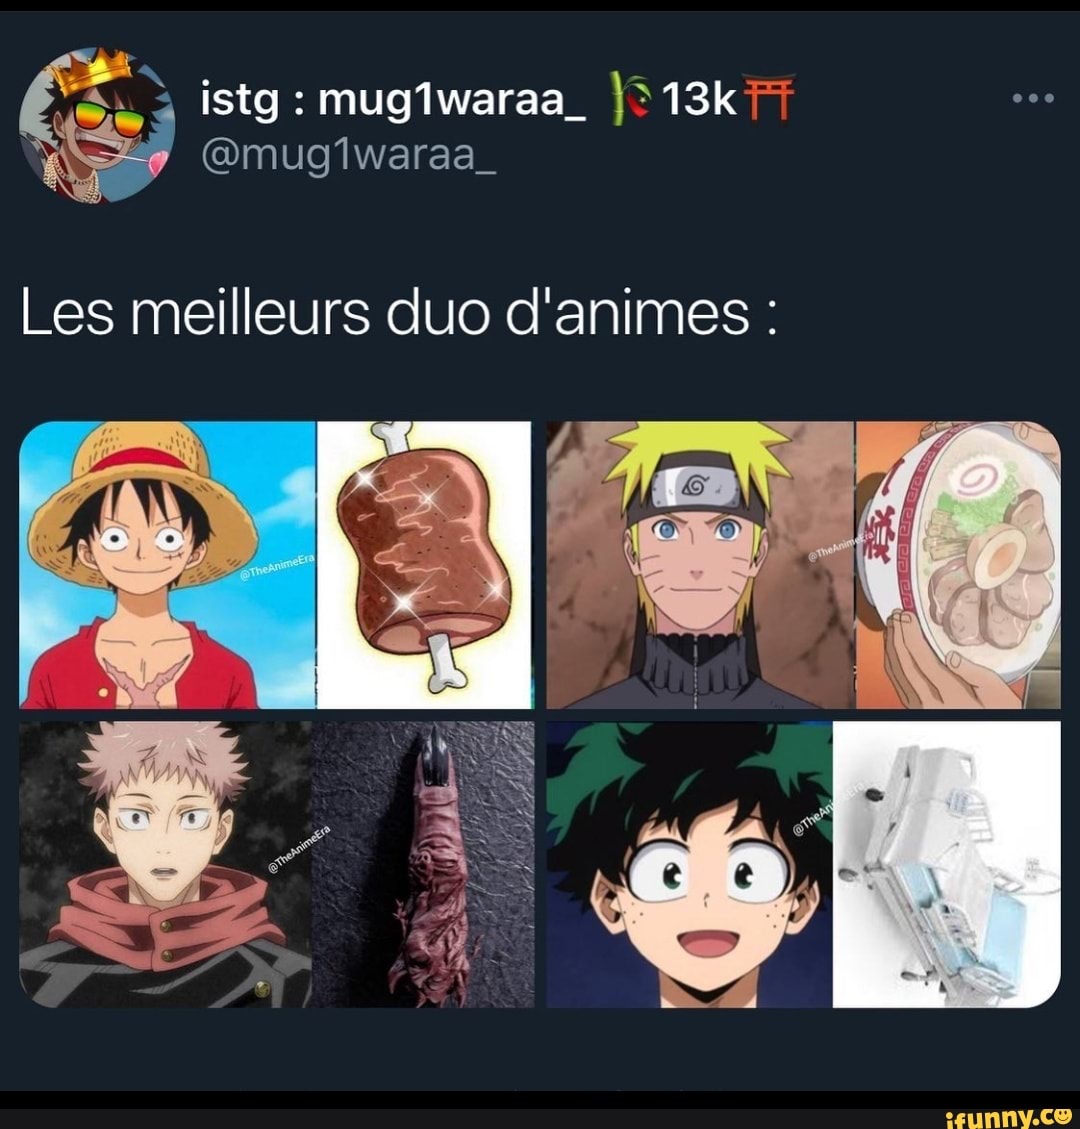 The best anime duo - Les meilleurs duo d'animes: 